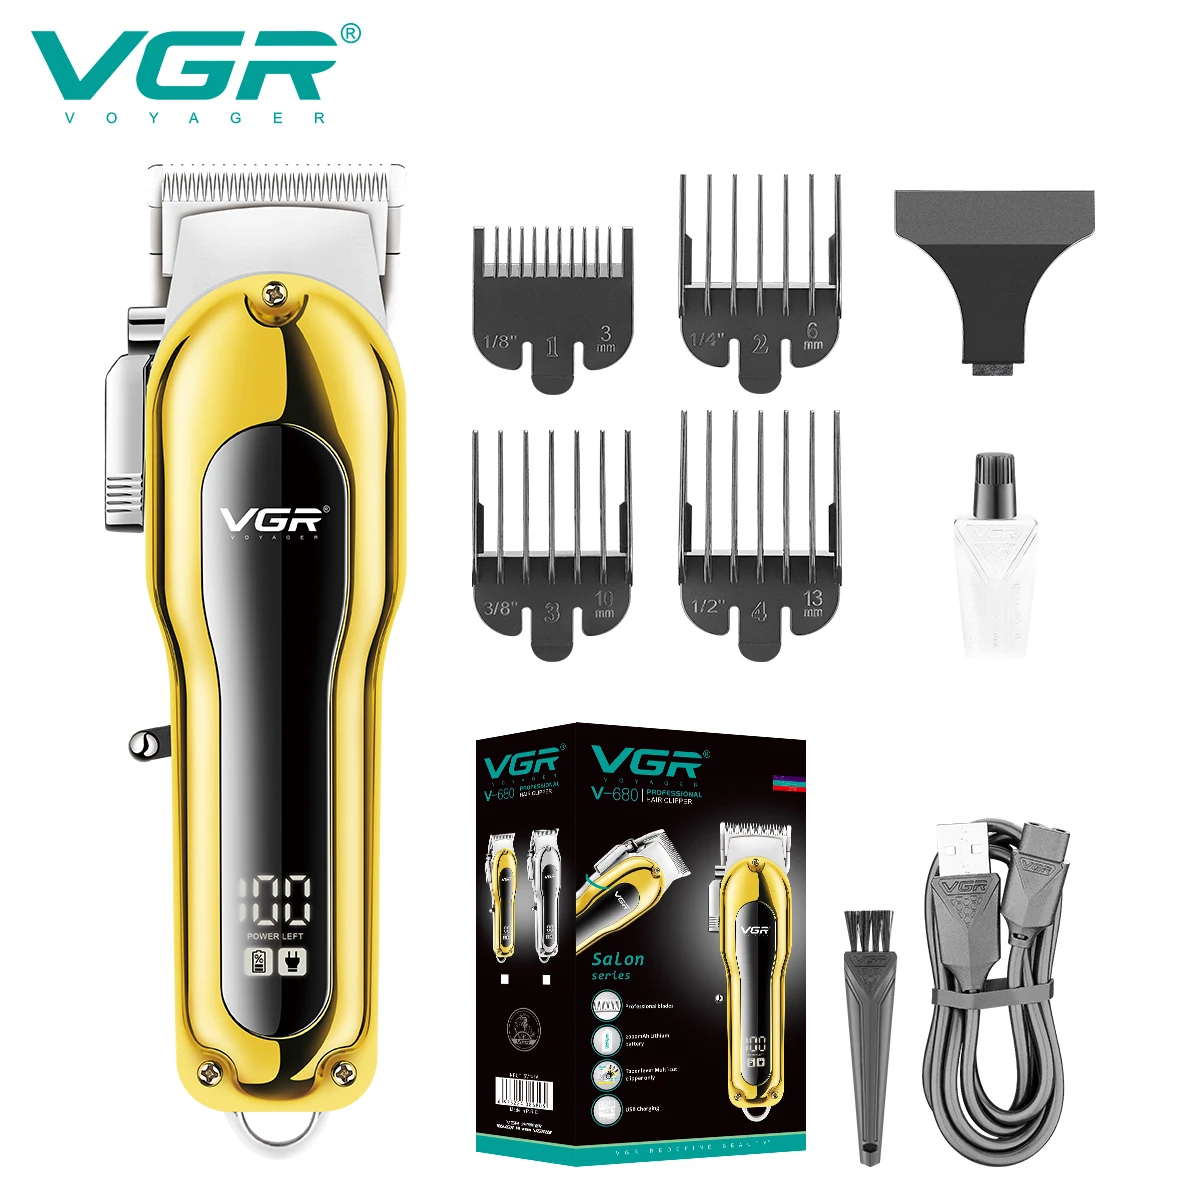 VGR Hair Clipper Professional Hair Cutting Machine Rechargeable Hair Trimmer Adjustable Barber Cordless Digital Display V-680